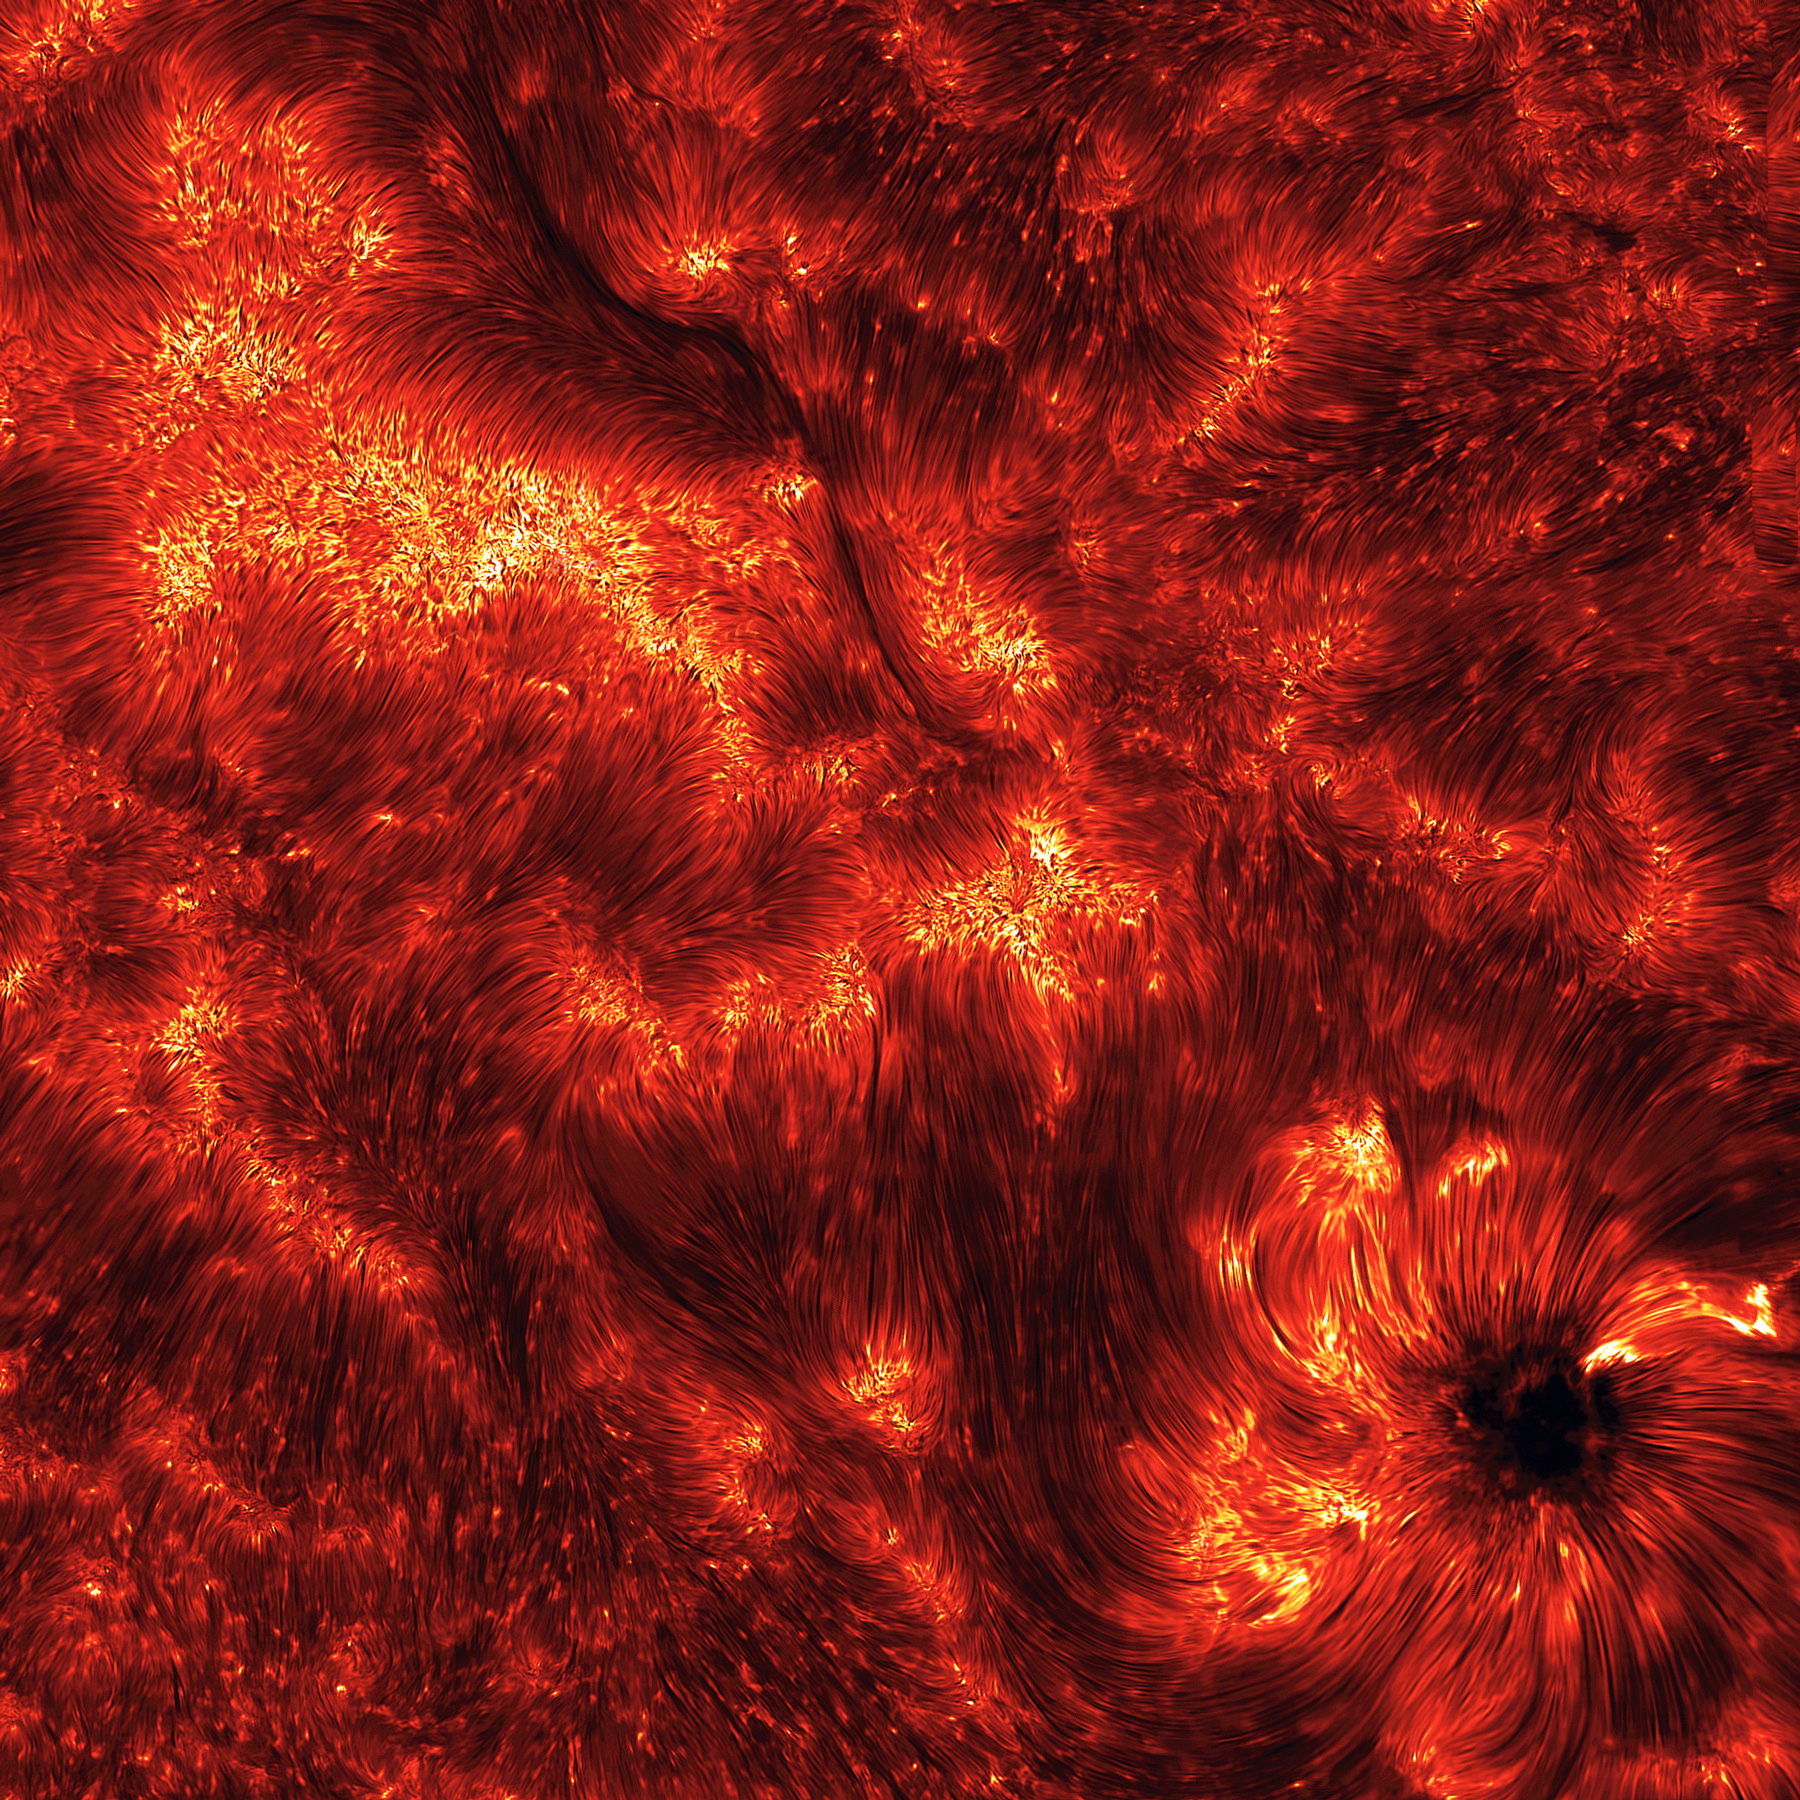 Spicules are vast, fast-moving tubes of plasma that cover the surface of the sun.